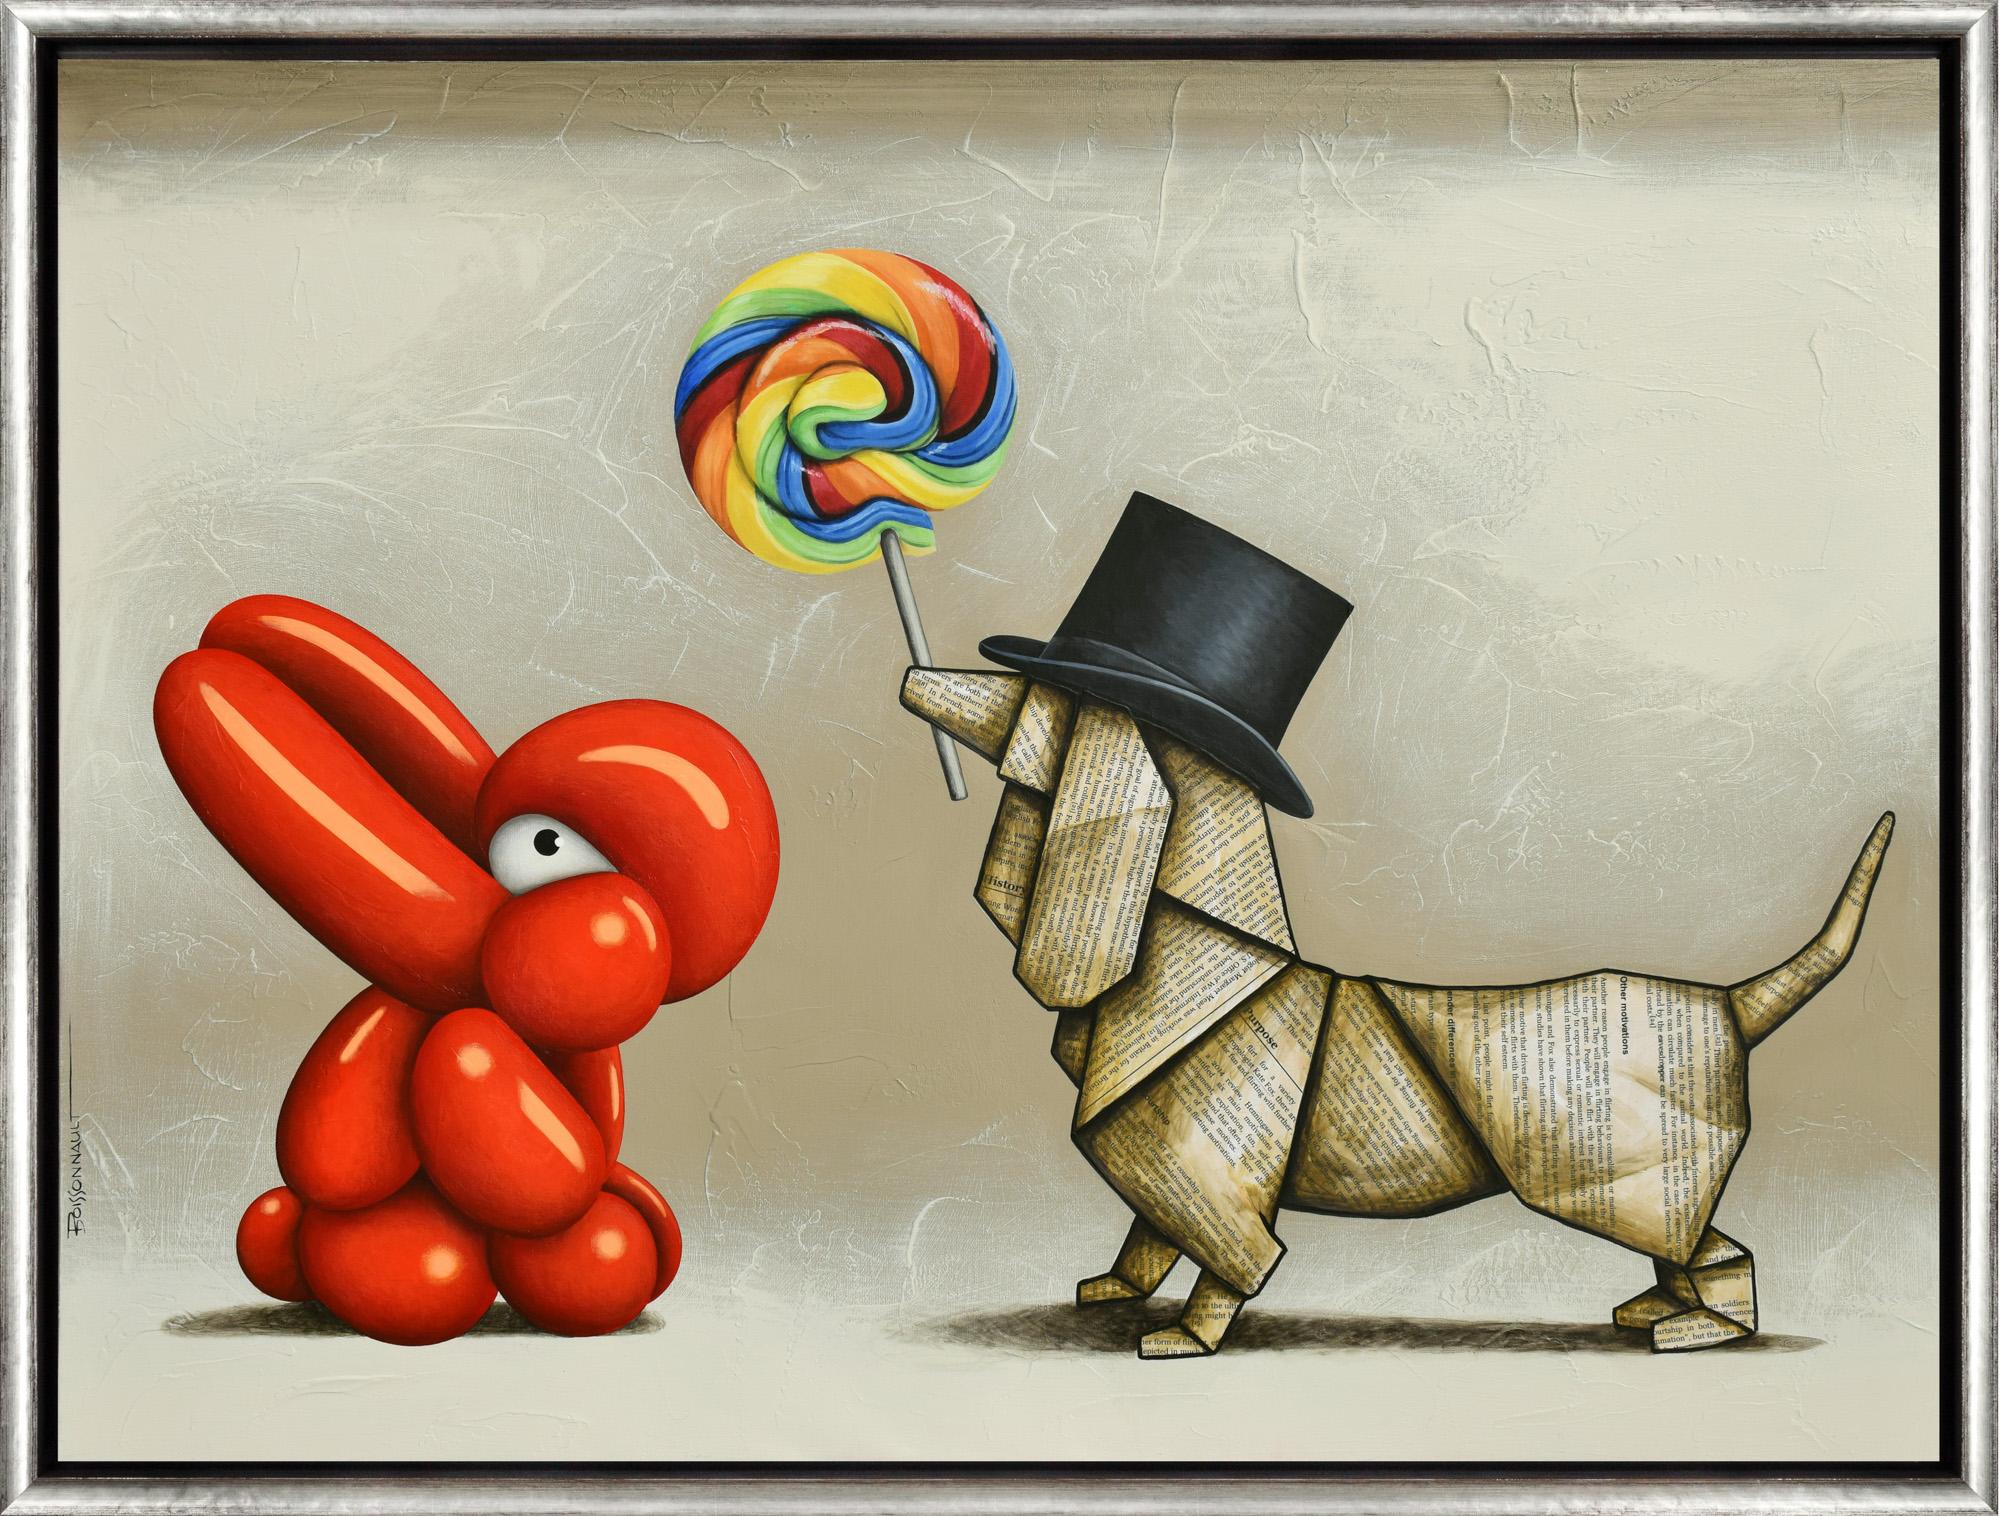 "Flirting" Mixed Media Dachshund with Lollipop and Balloon Animal Details